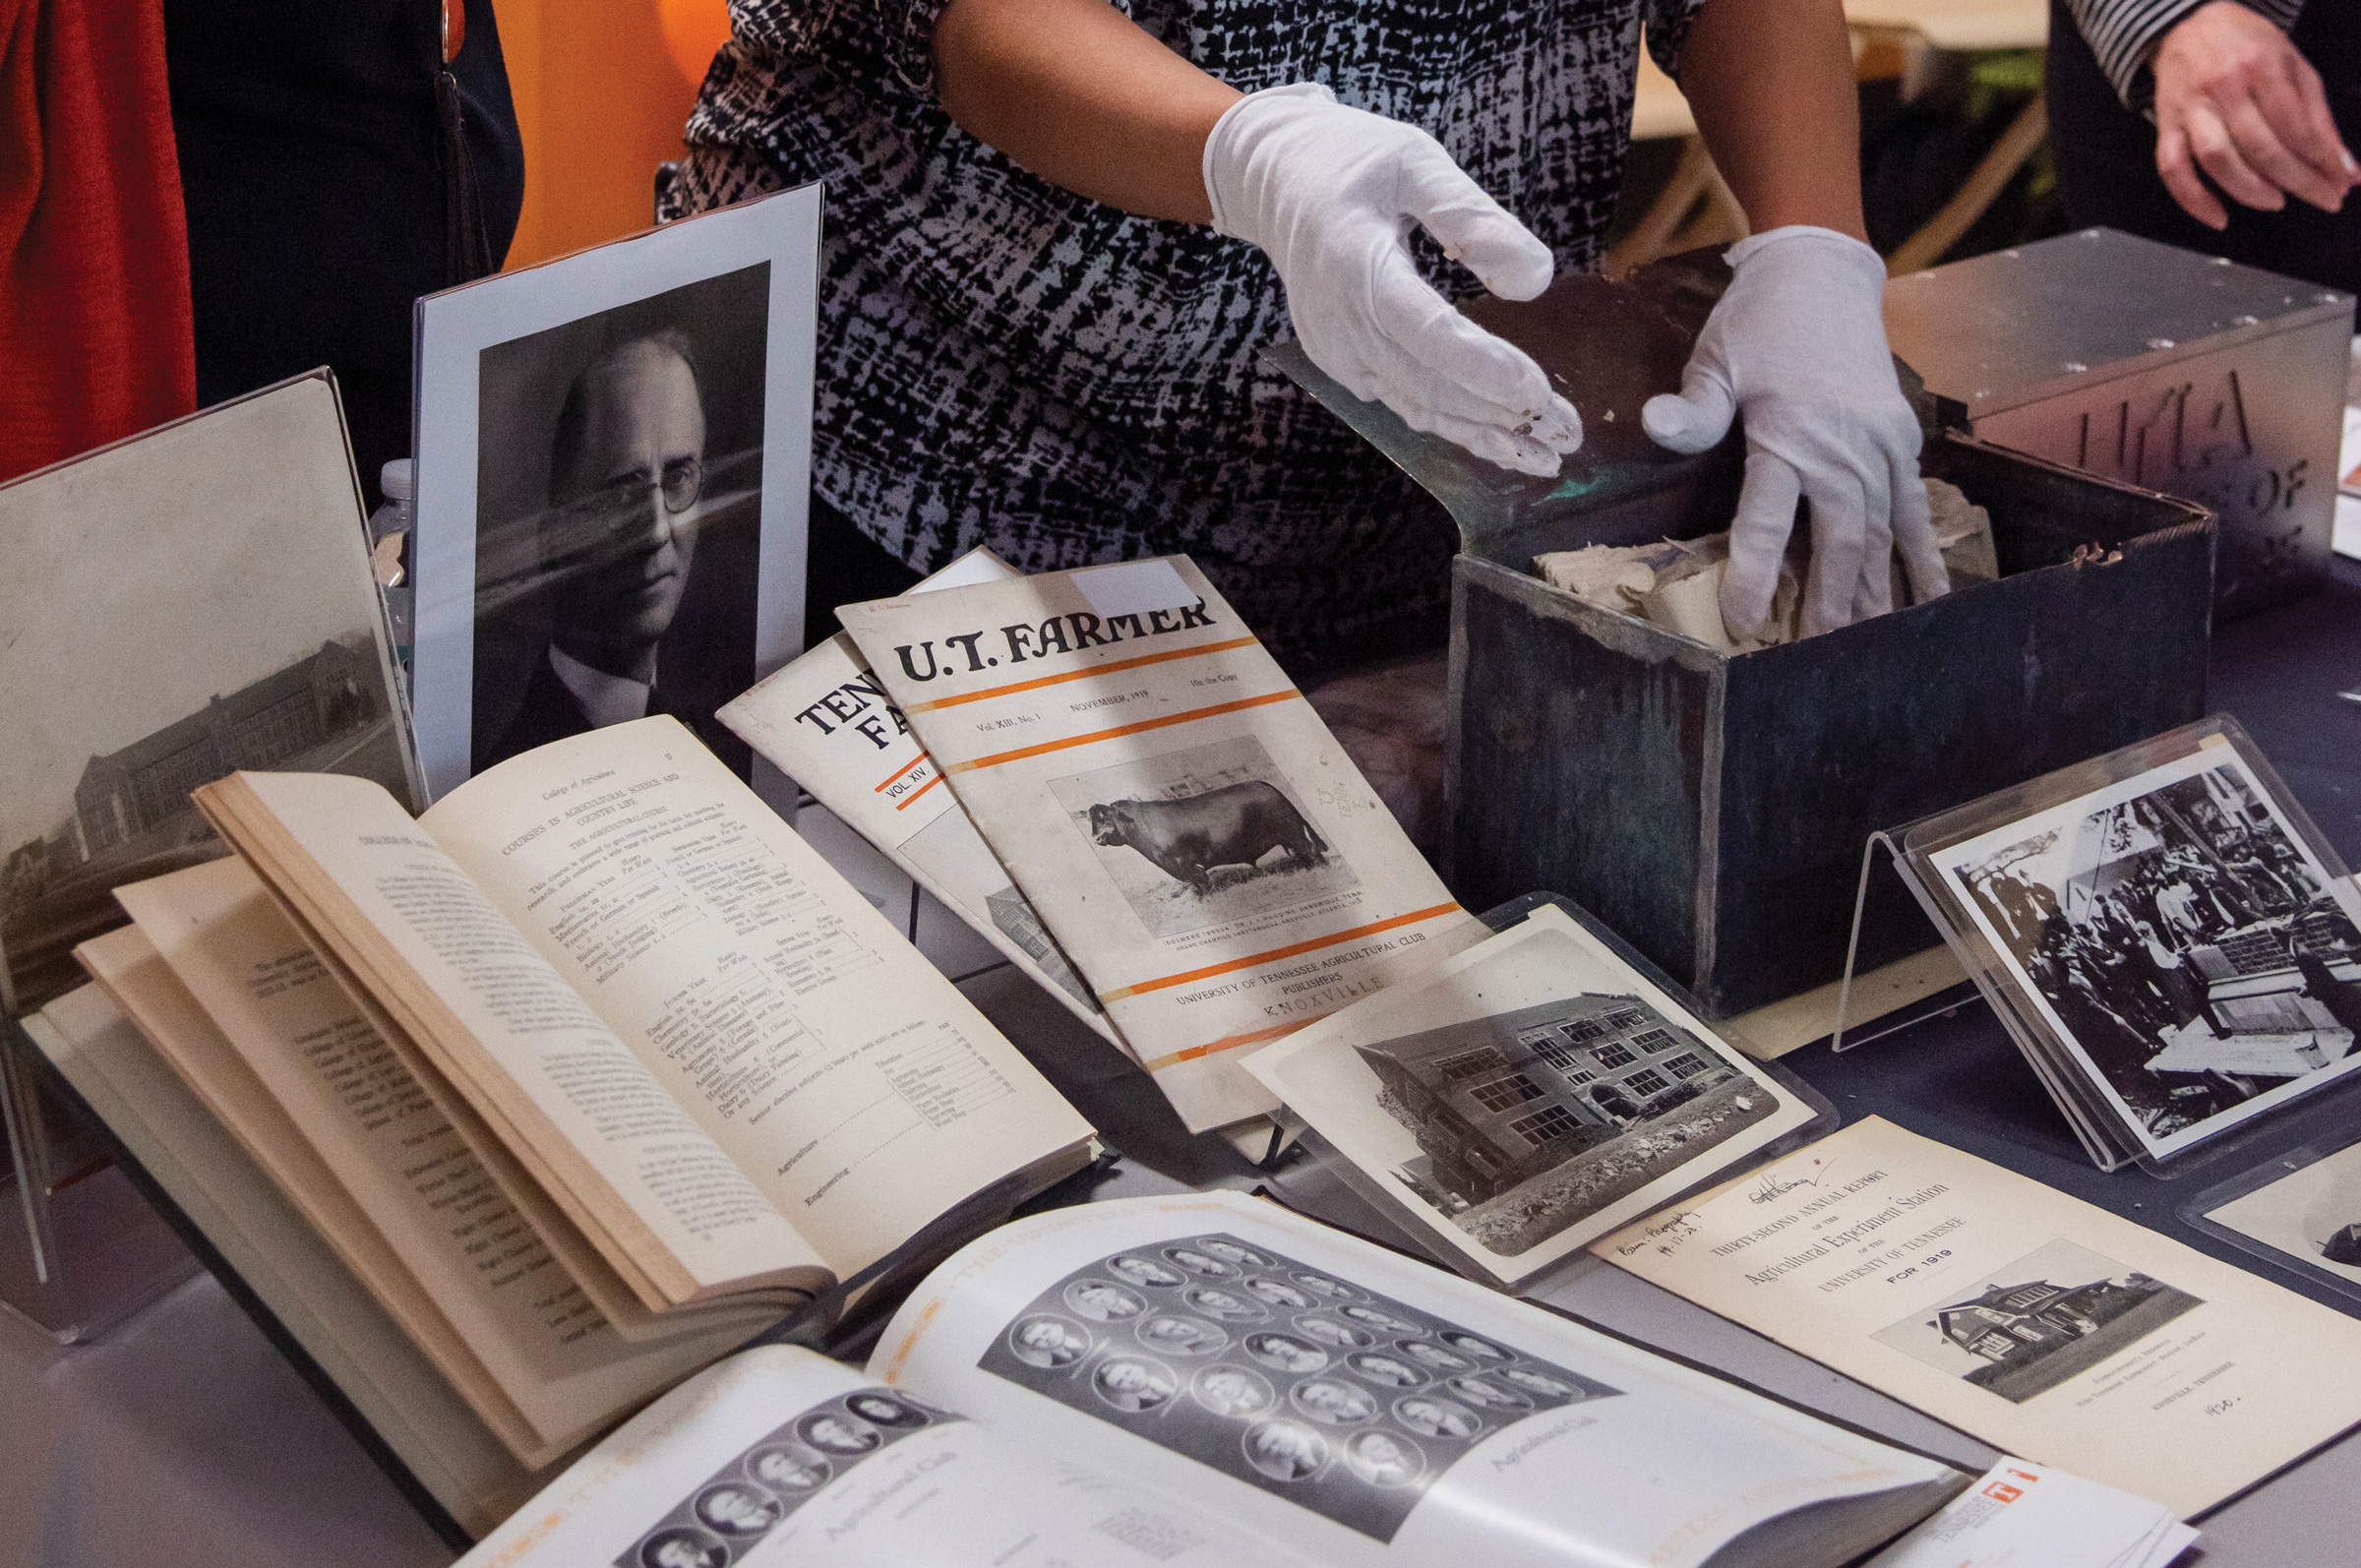 Two gloved hands carefully hande documents from 1919 unsealed from a time capsule